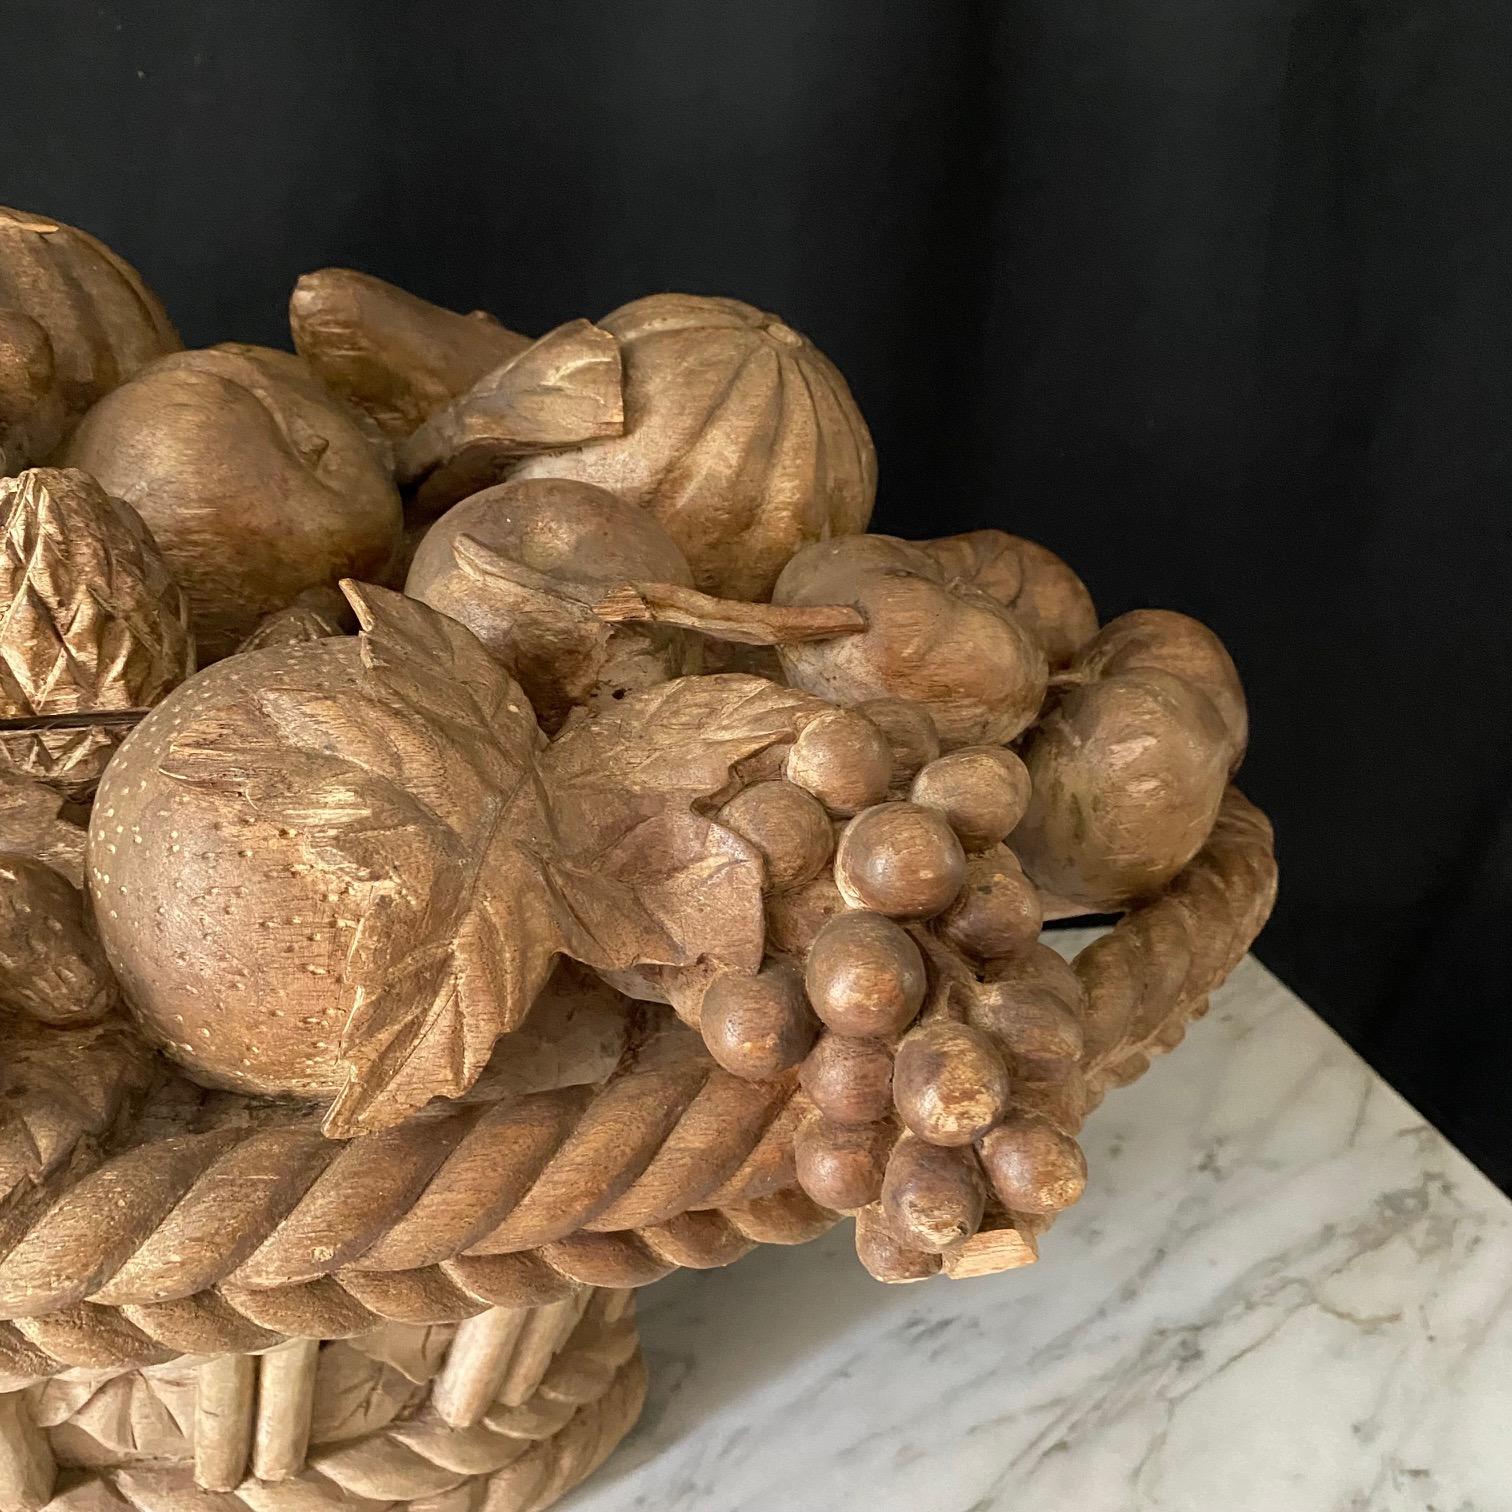 Stunningly large and detailed French carved woven basket filled with fruit. A cornucopia, this beautiful artwork depicts stunningly carved grapes, apples, and all kinds of fruit, wonderfully arranged in a braided woven basket base, all one solid